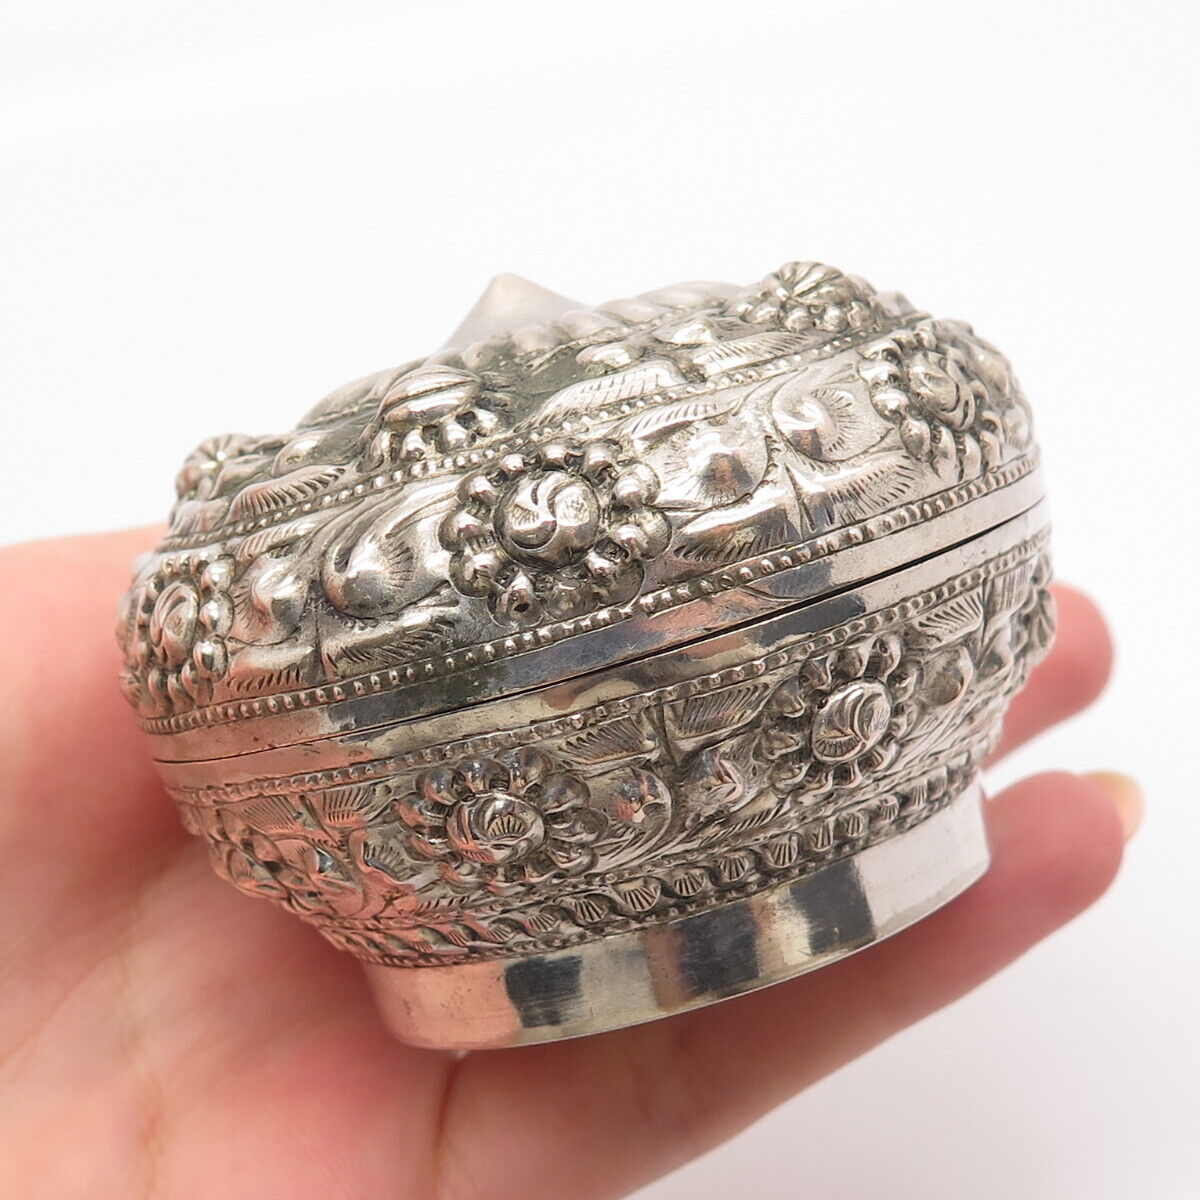 Rare Antique Chinese Export Silver Repousse Floral Handcrafted Betel Box